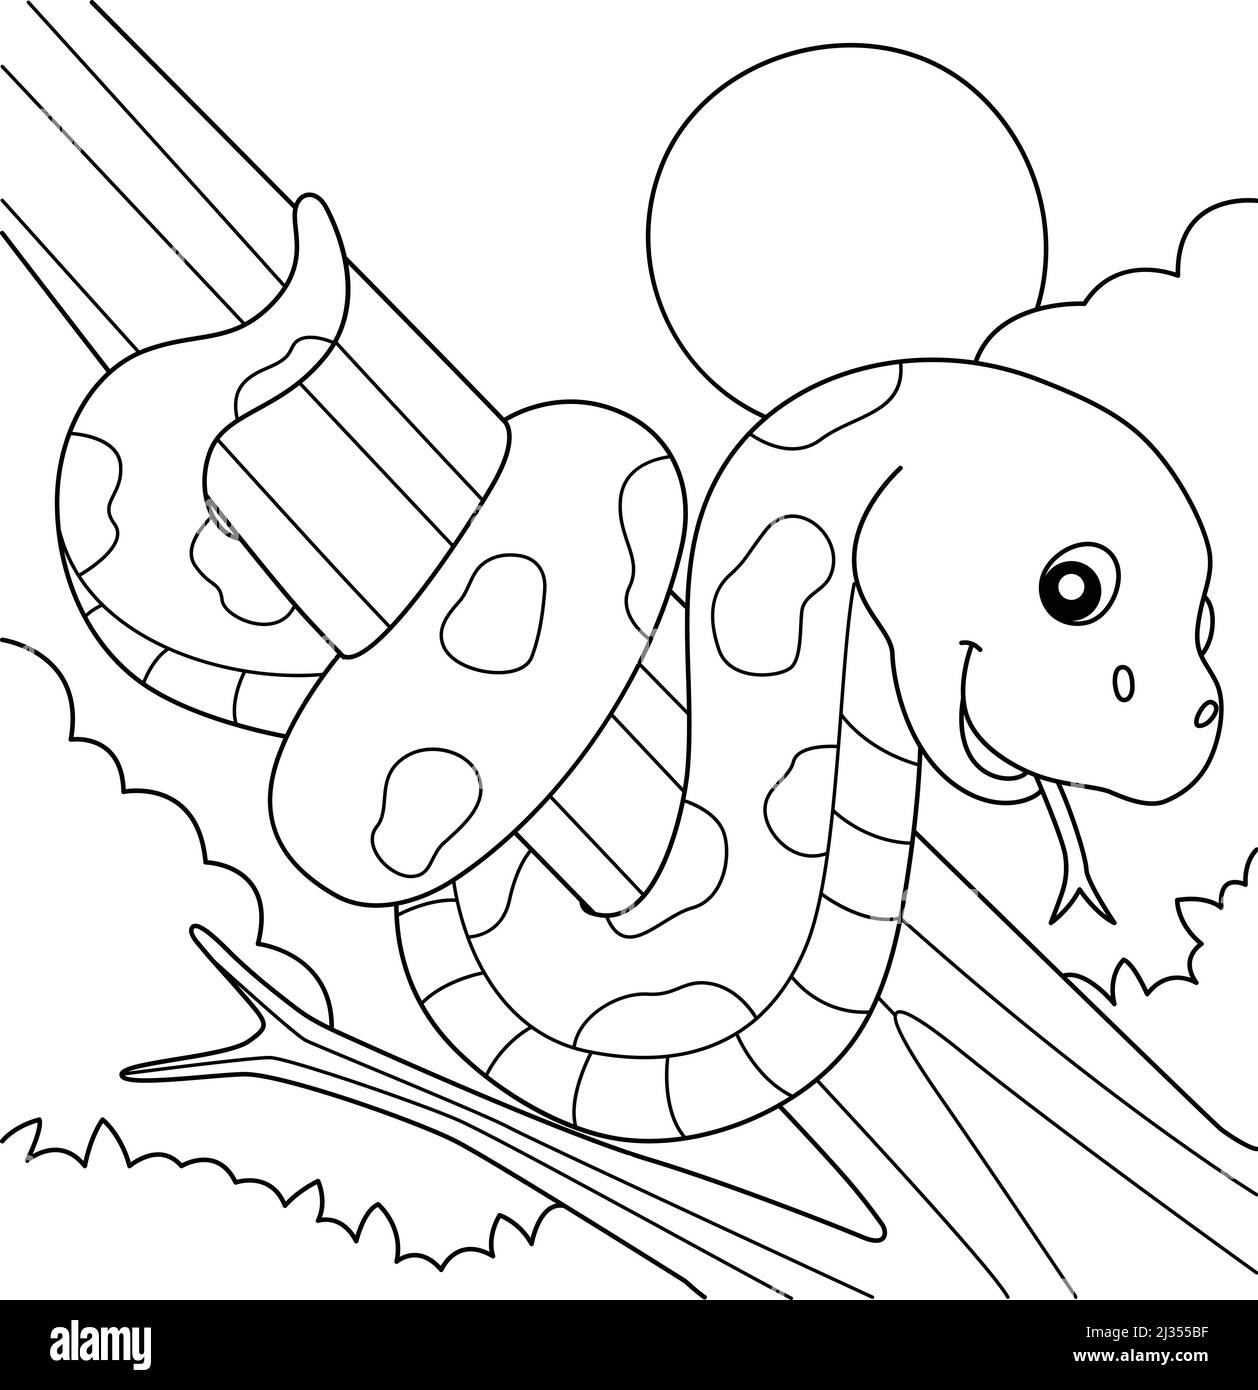 Snake Animal Coloring Page for Kids Stock Vector